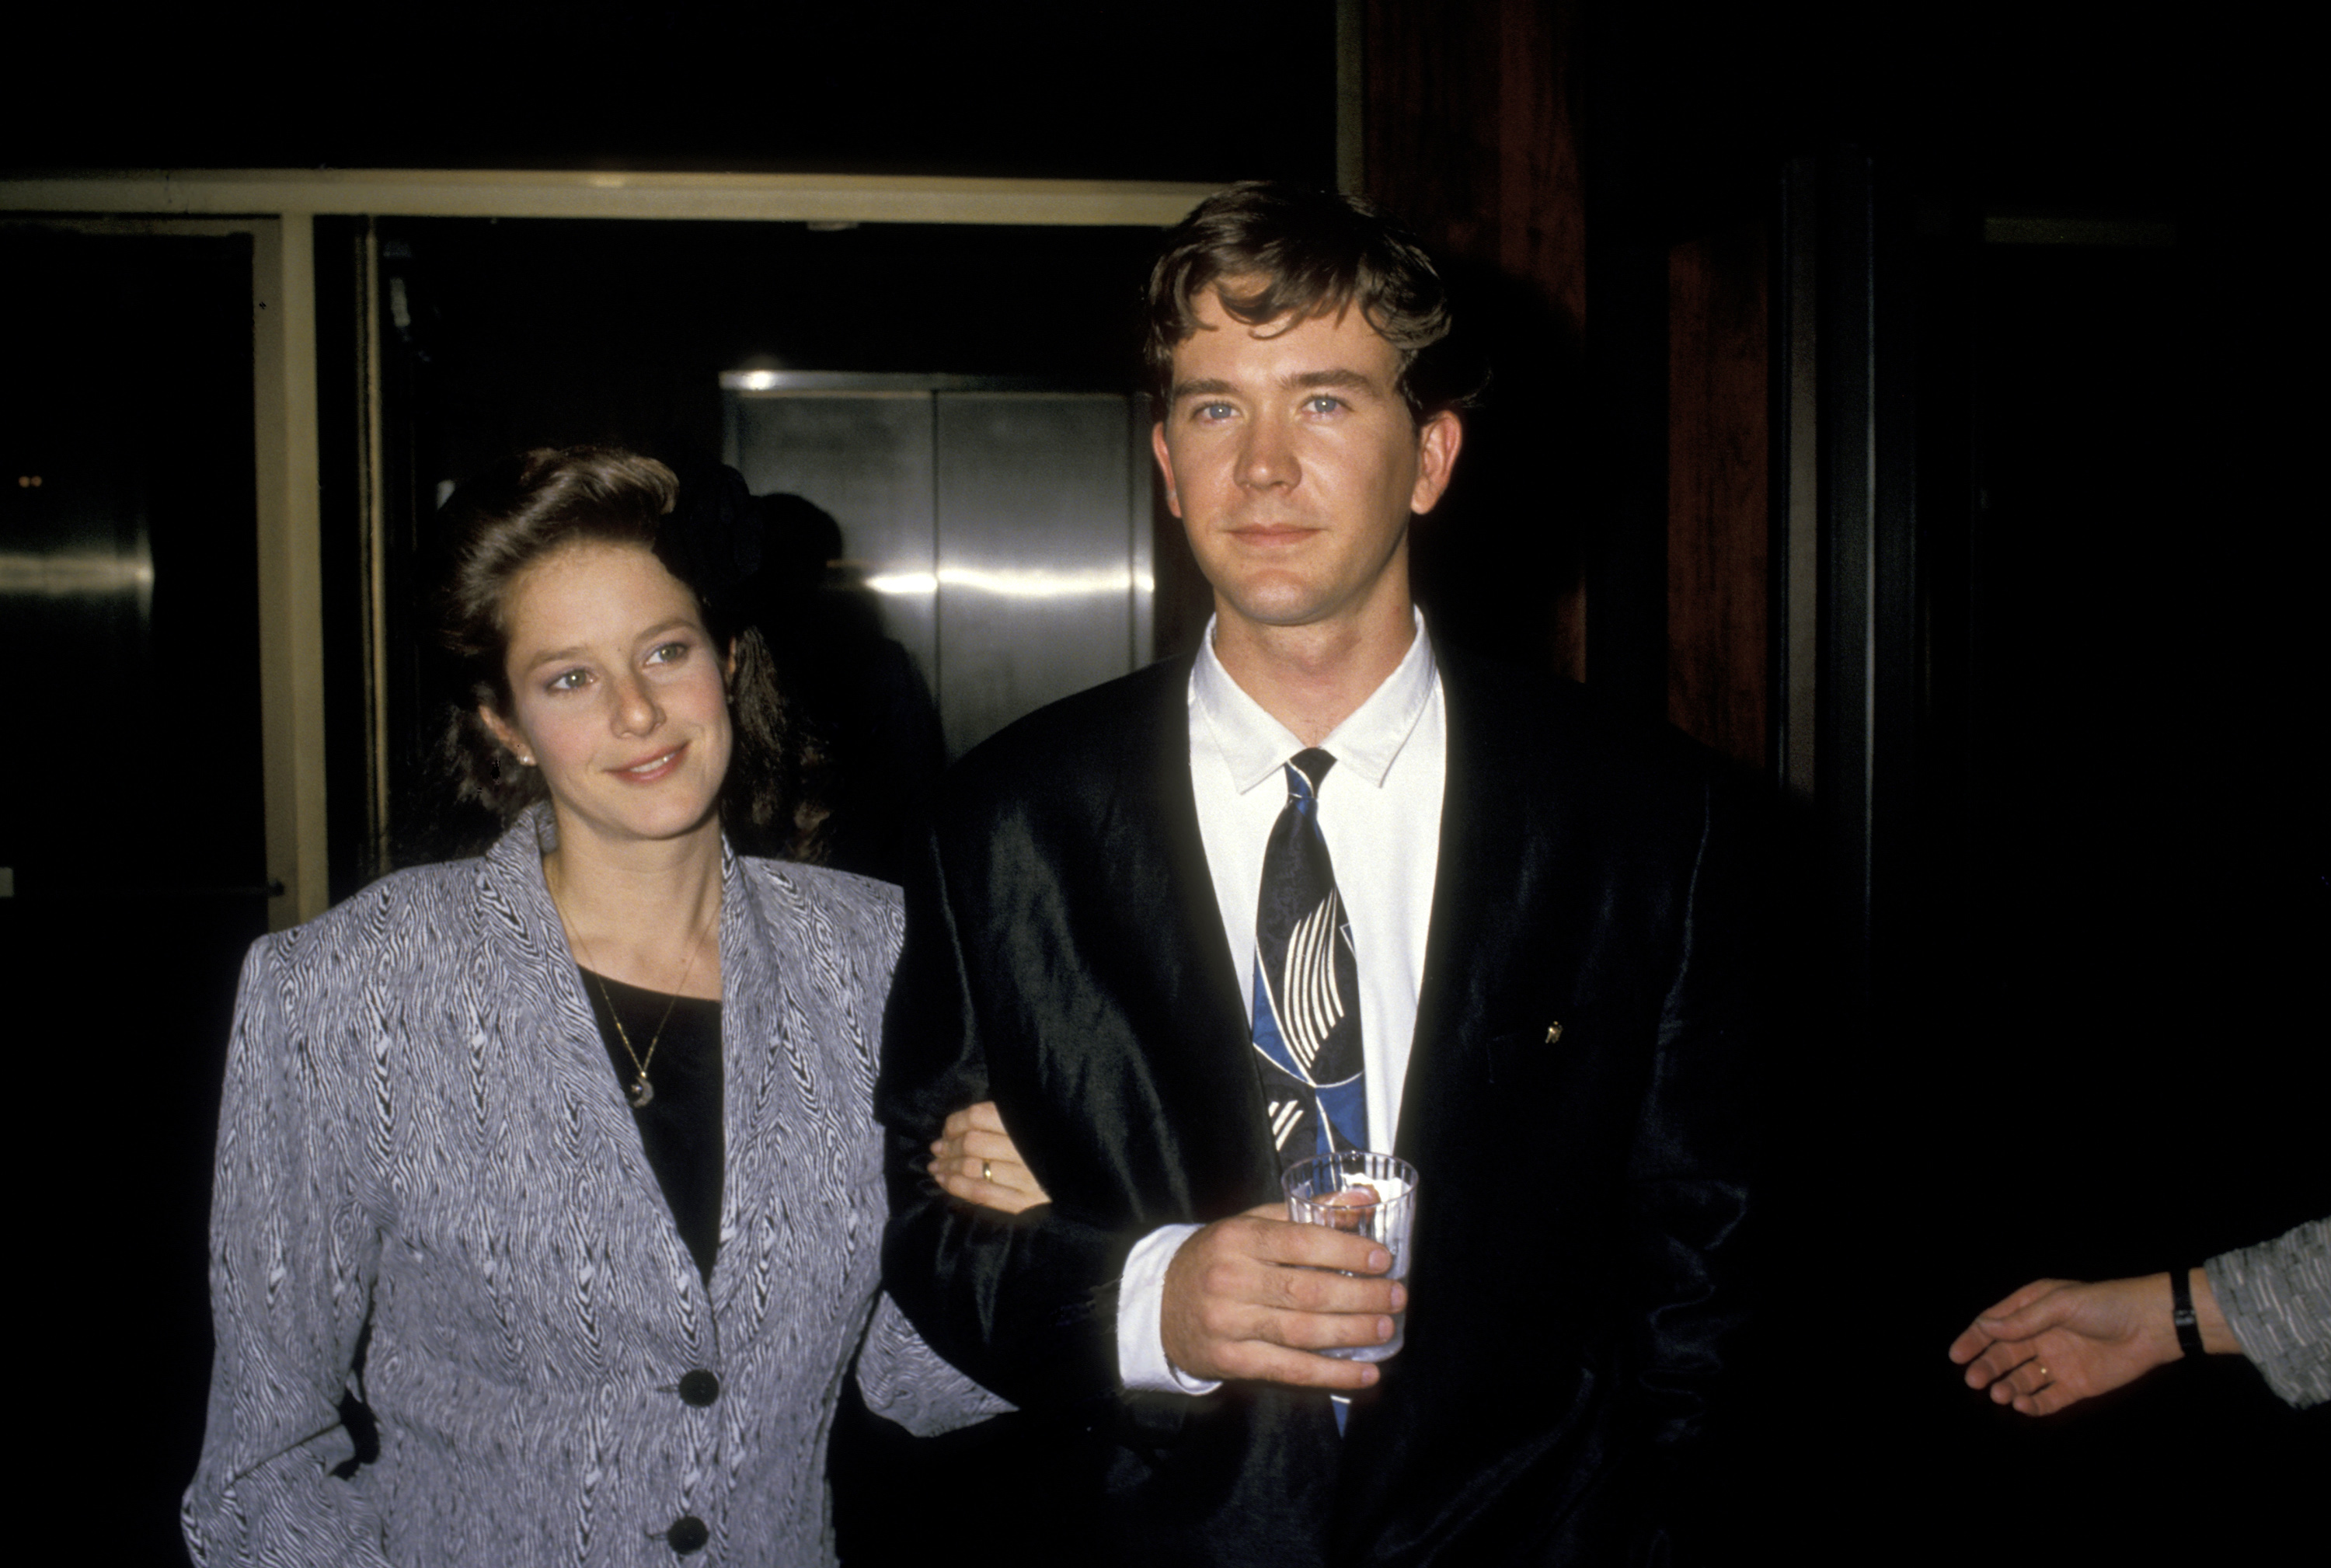 Debra Winger and Timothy Hutton during 1987 Student Film Awards on June 6, 1987 in Beverly Hills, California. | Source: Getty Images